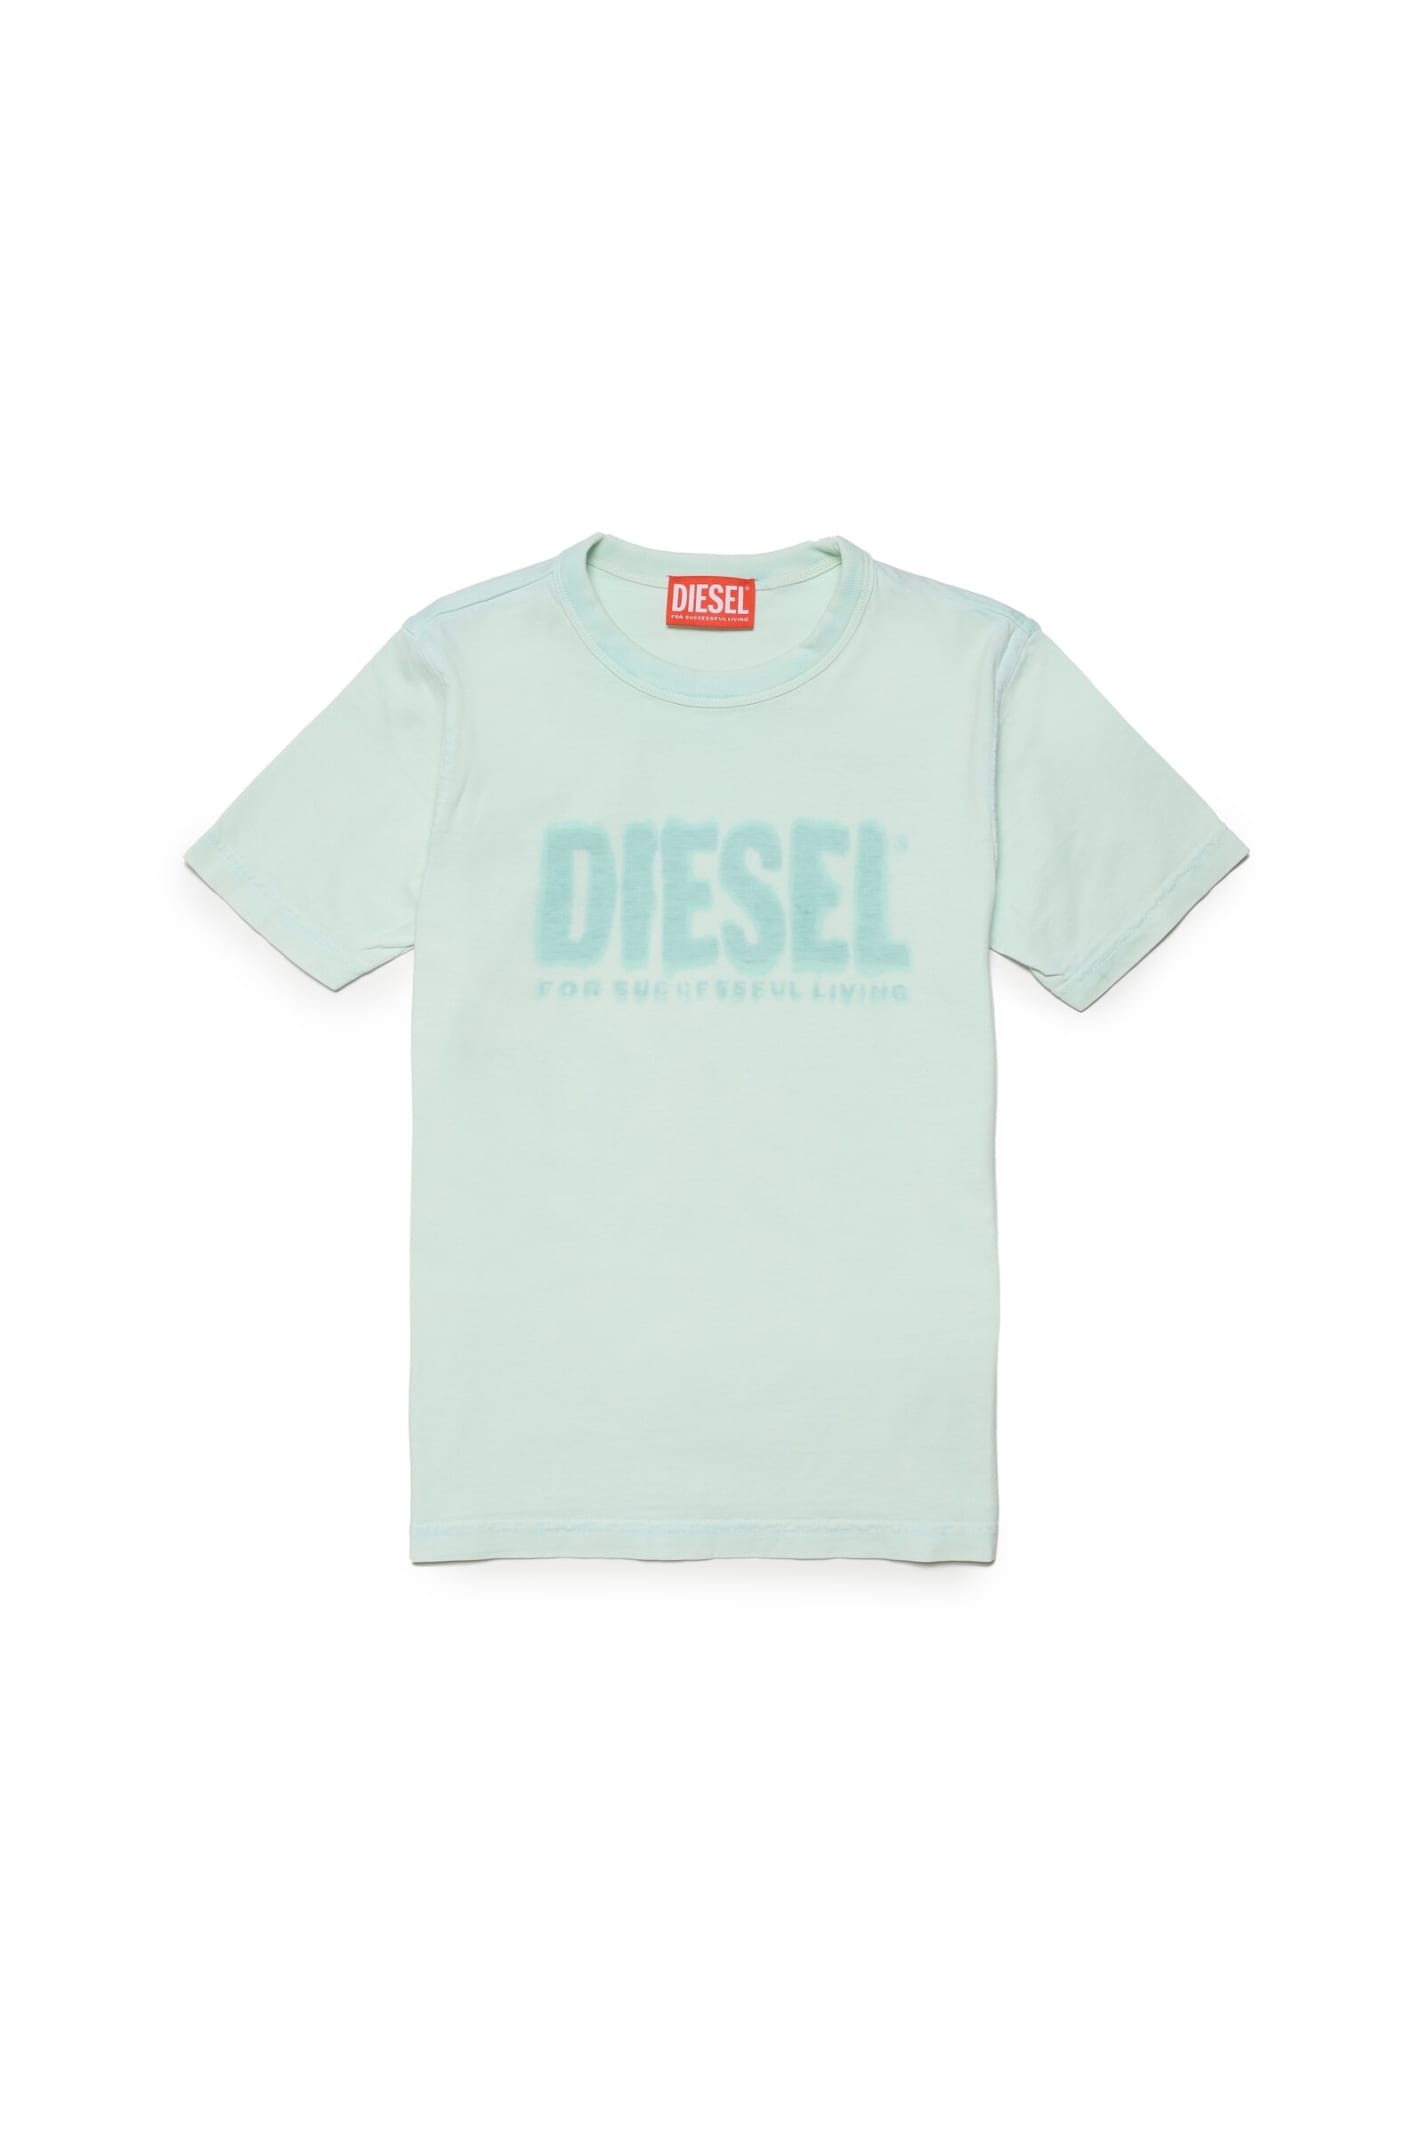 DIESEL TDIEGORE6 T-SHIRT DIESEL GREEN COTTON T-SHIRT WITH FADED EFFECT LOGO